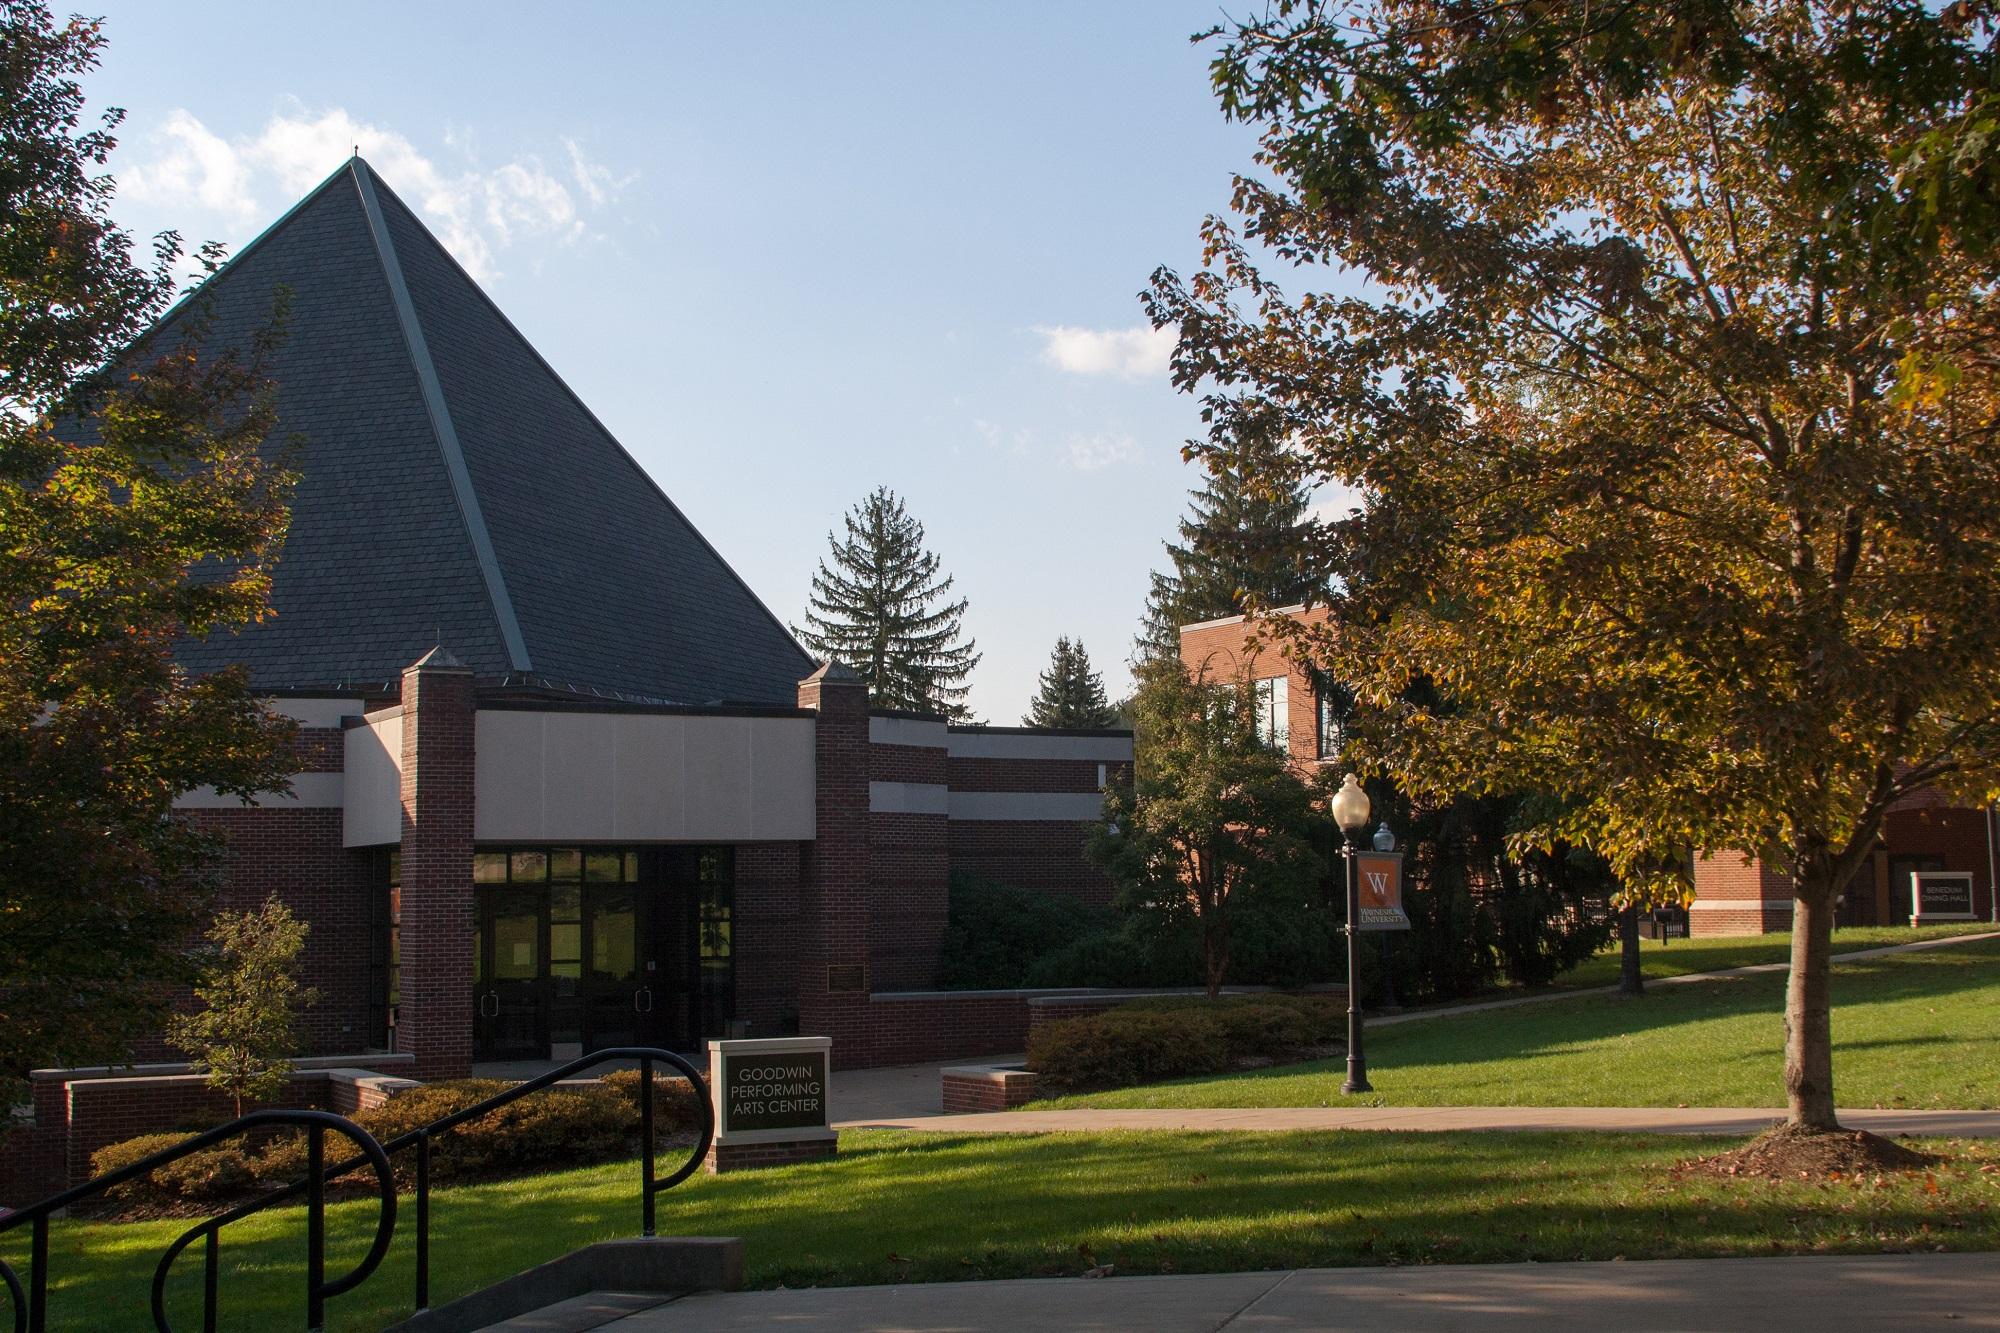 Goodwin Performing Arts Center in the fall